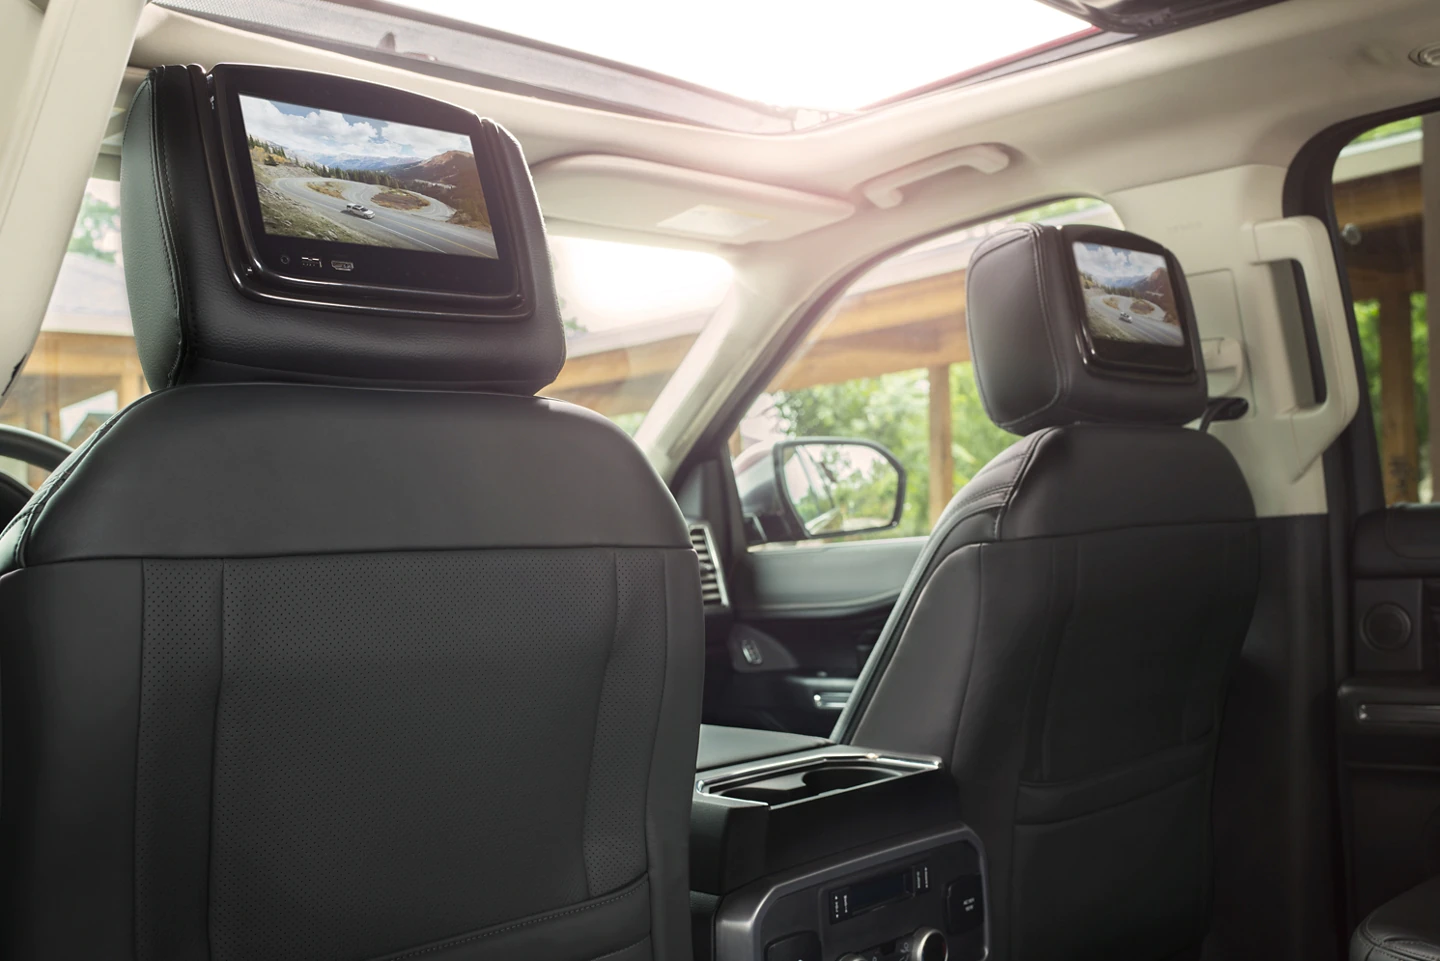 2021 Expedition Dual-Headrest Rear Seat Entertainment System